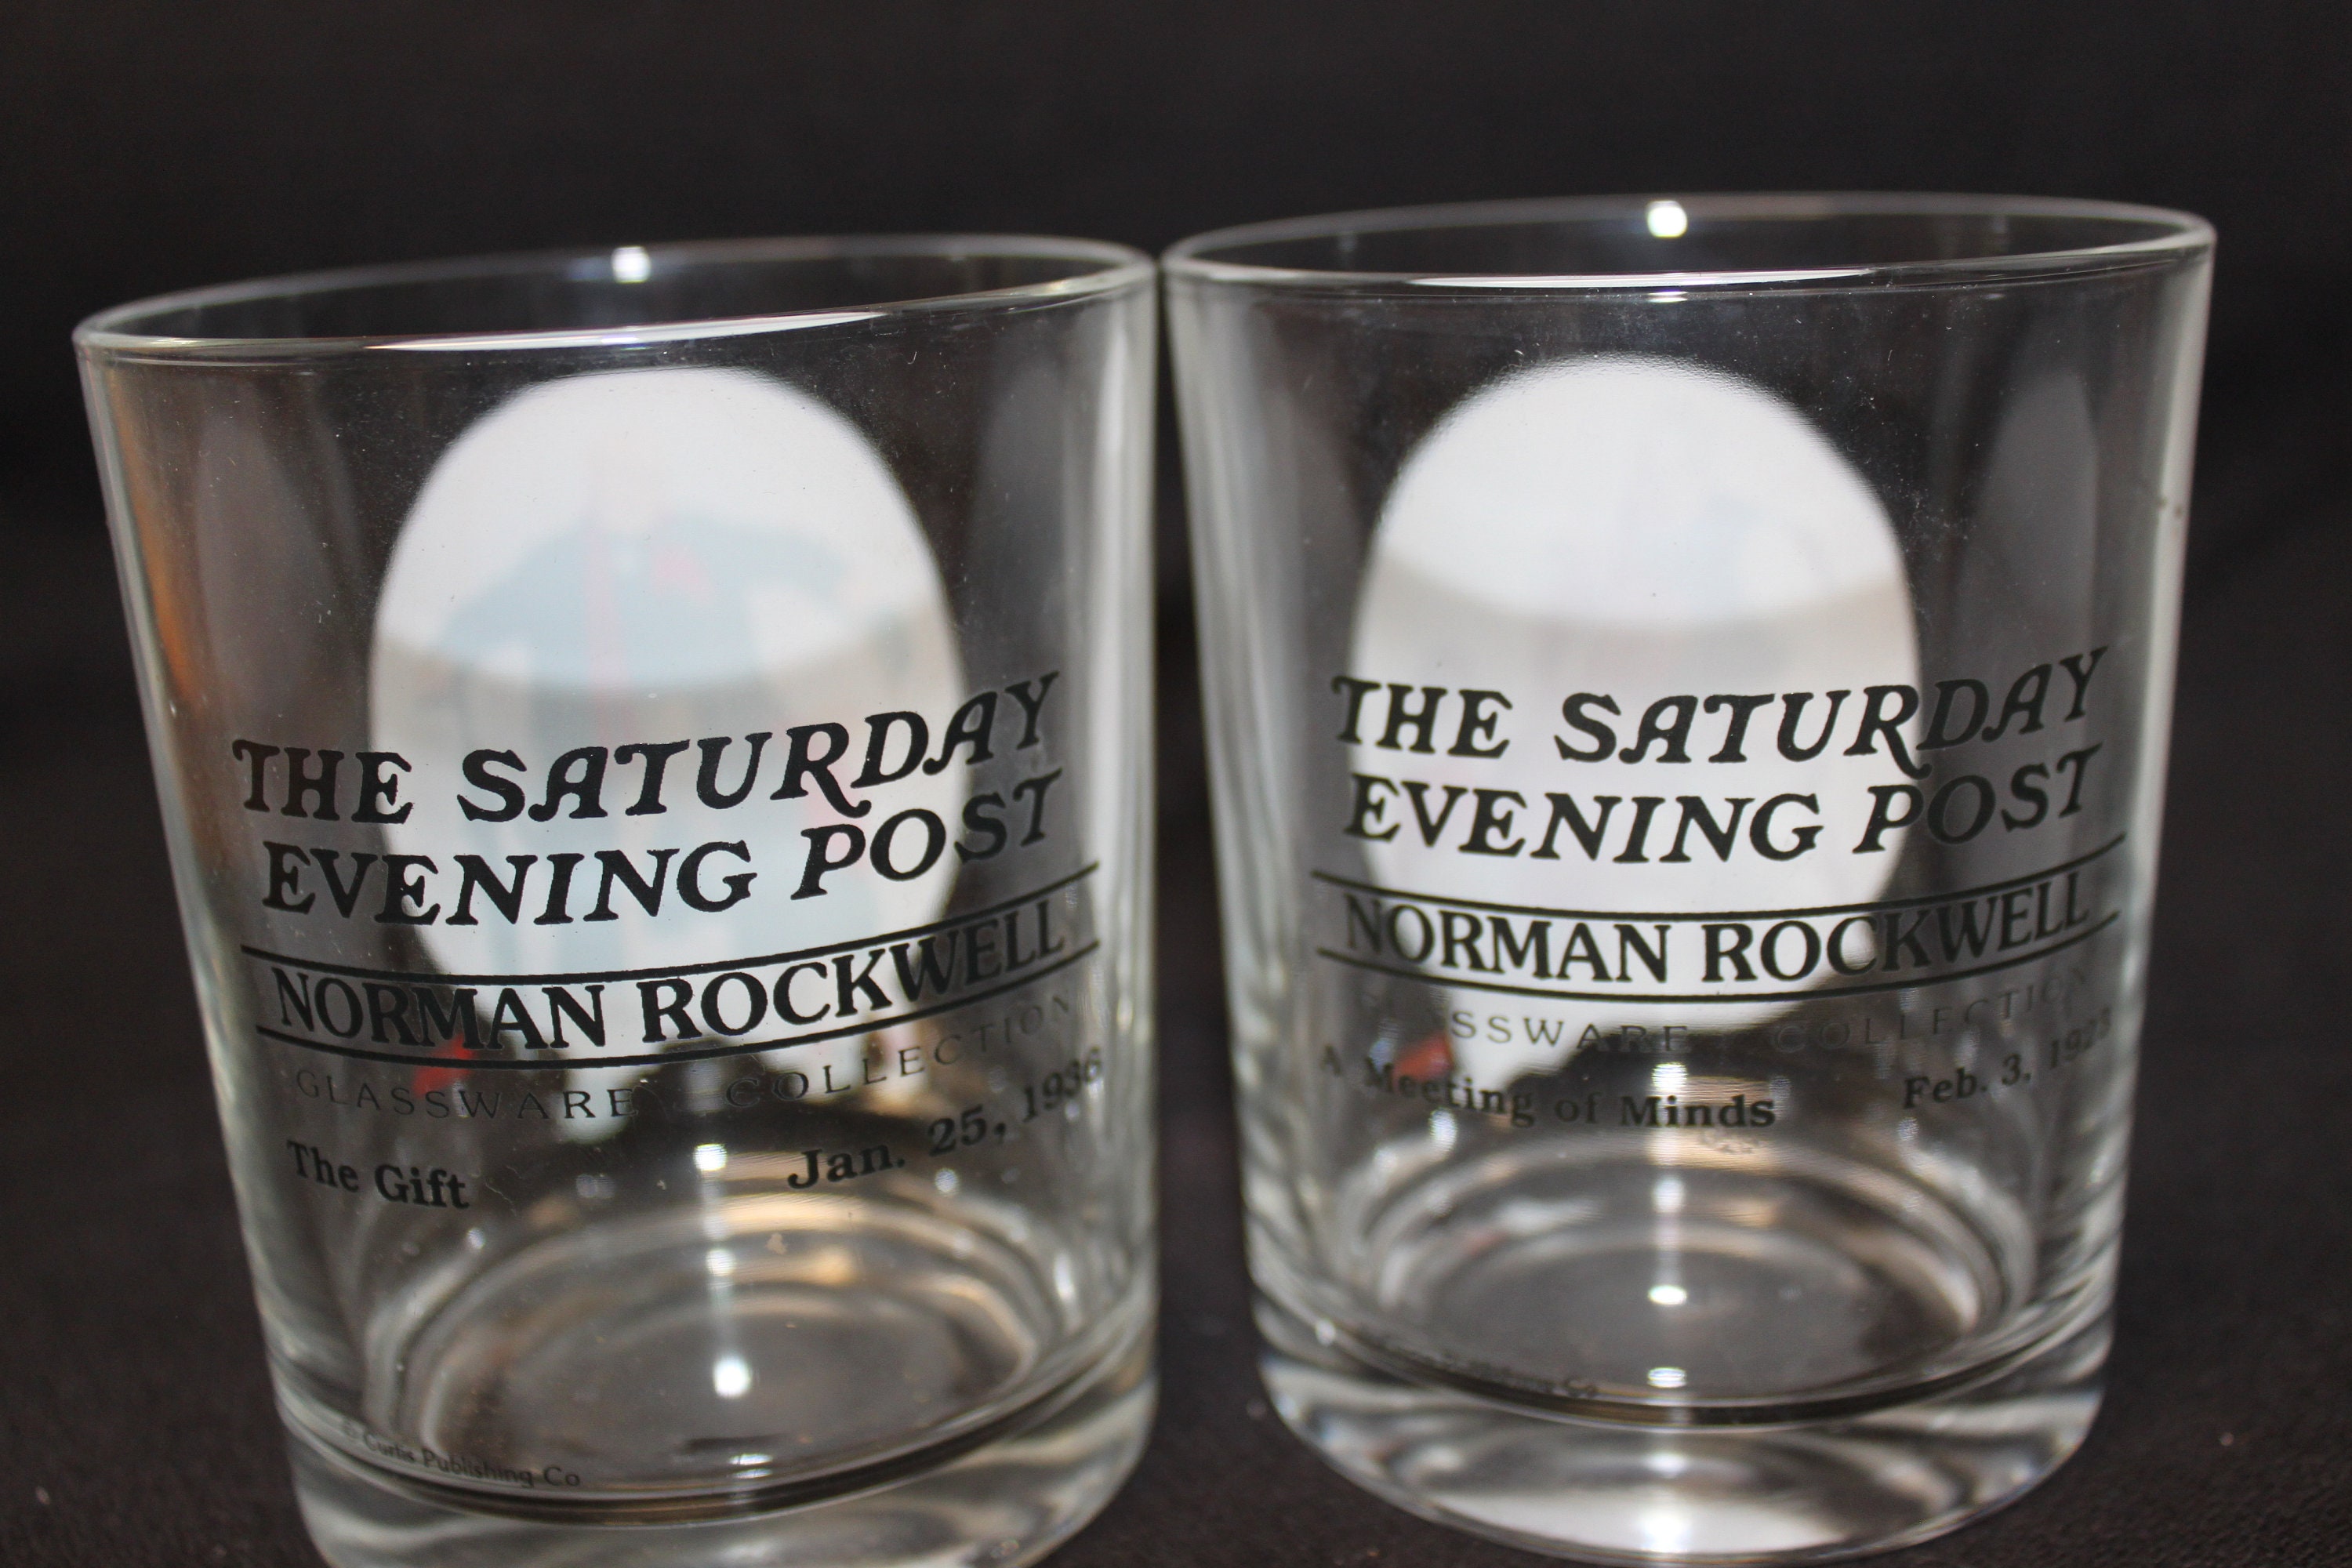 Norman Rockwell The Saturday Evening Post Glassware Set of 2 Rocks Glasses The Gift and A Meeting of Minds